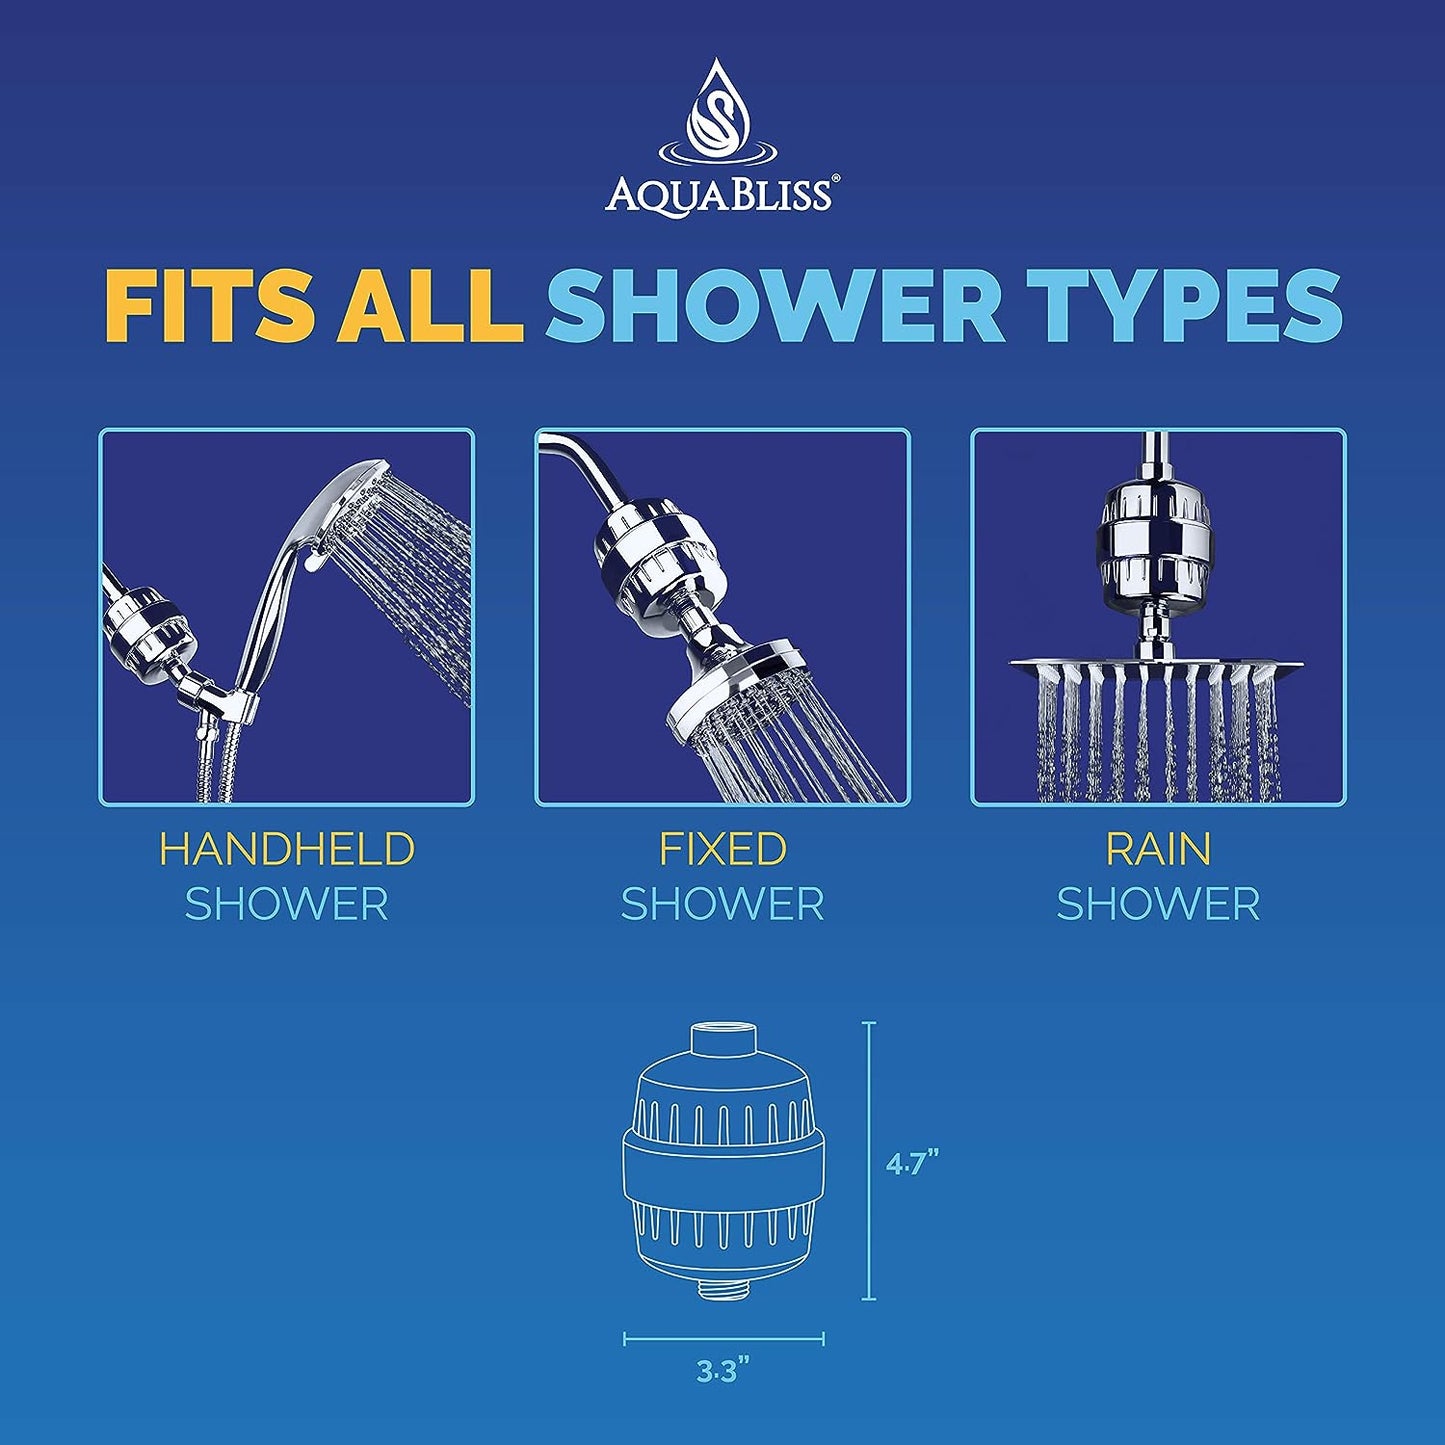 AquaBliss High Output Revitalizing Shower Filter - Reduces Dry Itchy Skin, Dandruff, Eczema, and Dramatically Improves The Condition of Your Skin, Hair and Nails - Chrome (SF100)